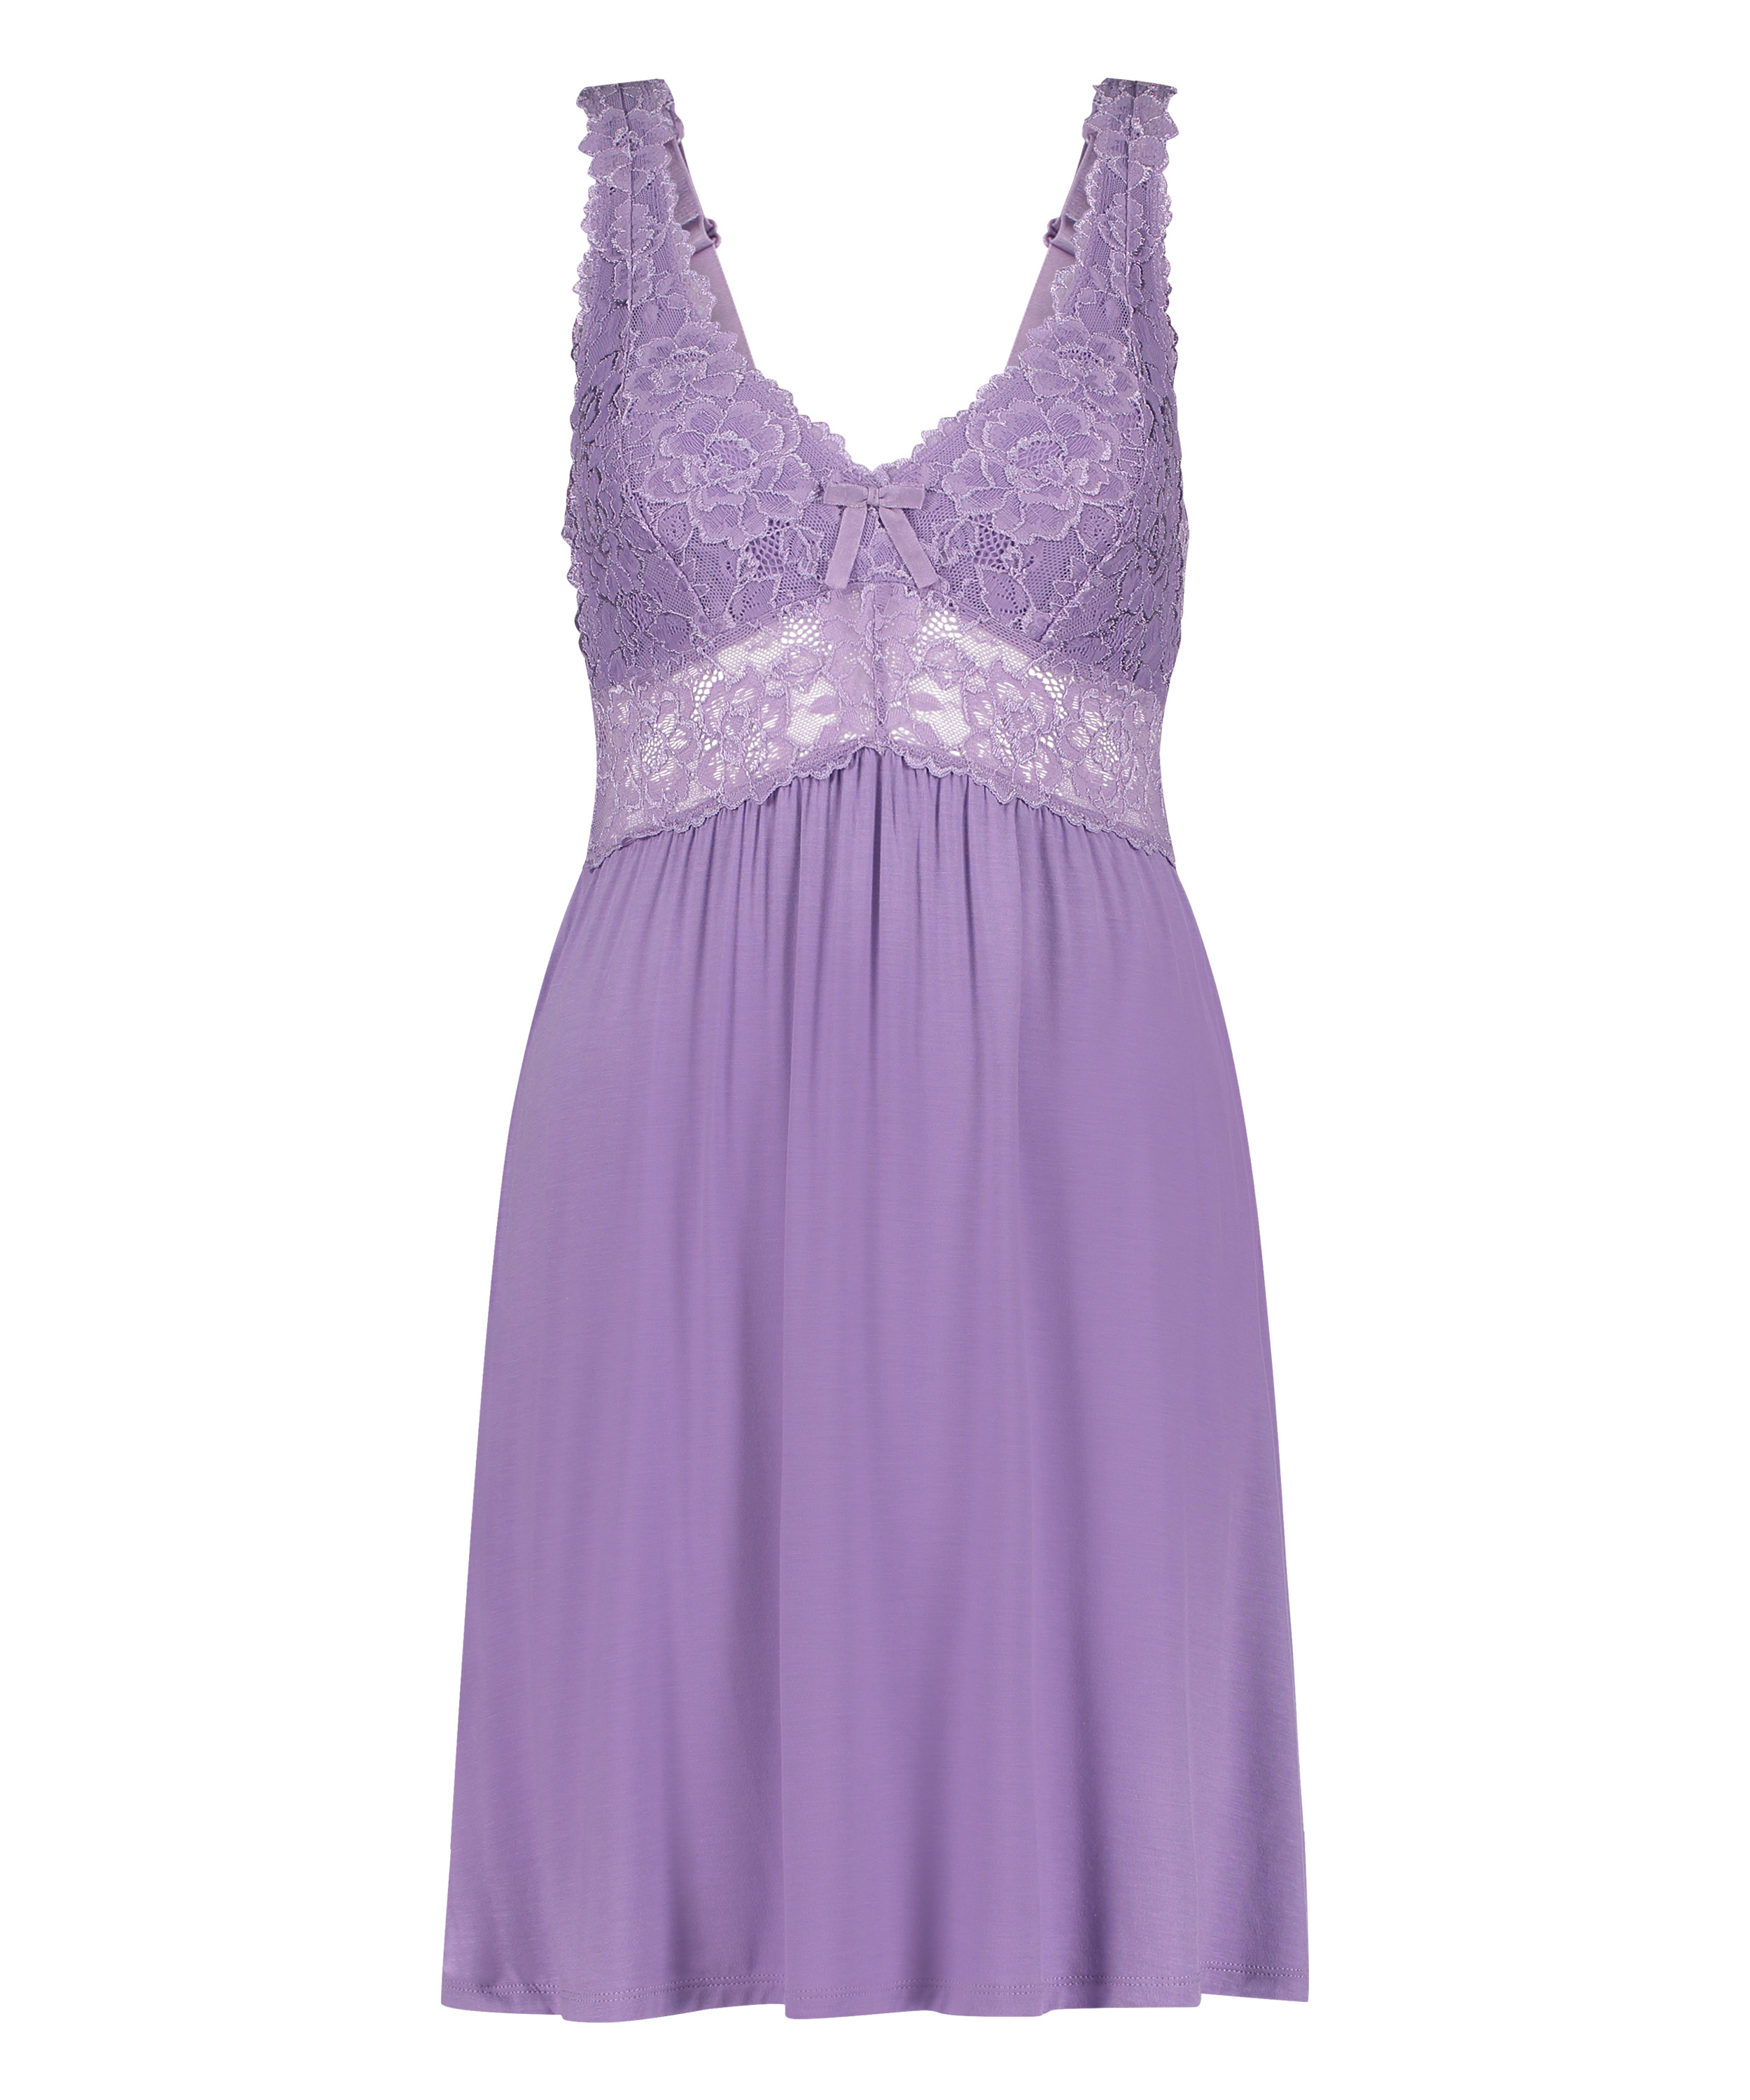 Nuisette Nora Lace, Violet, main